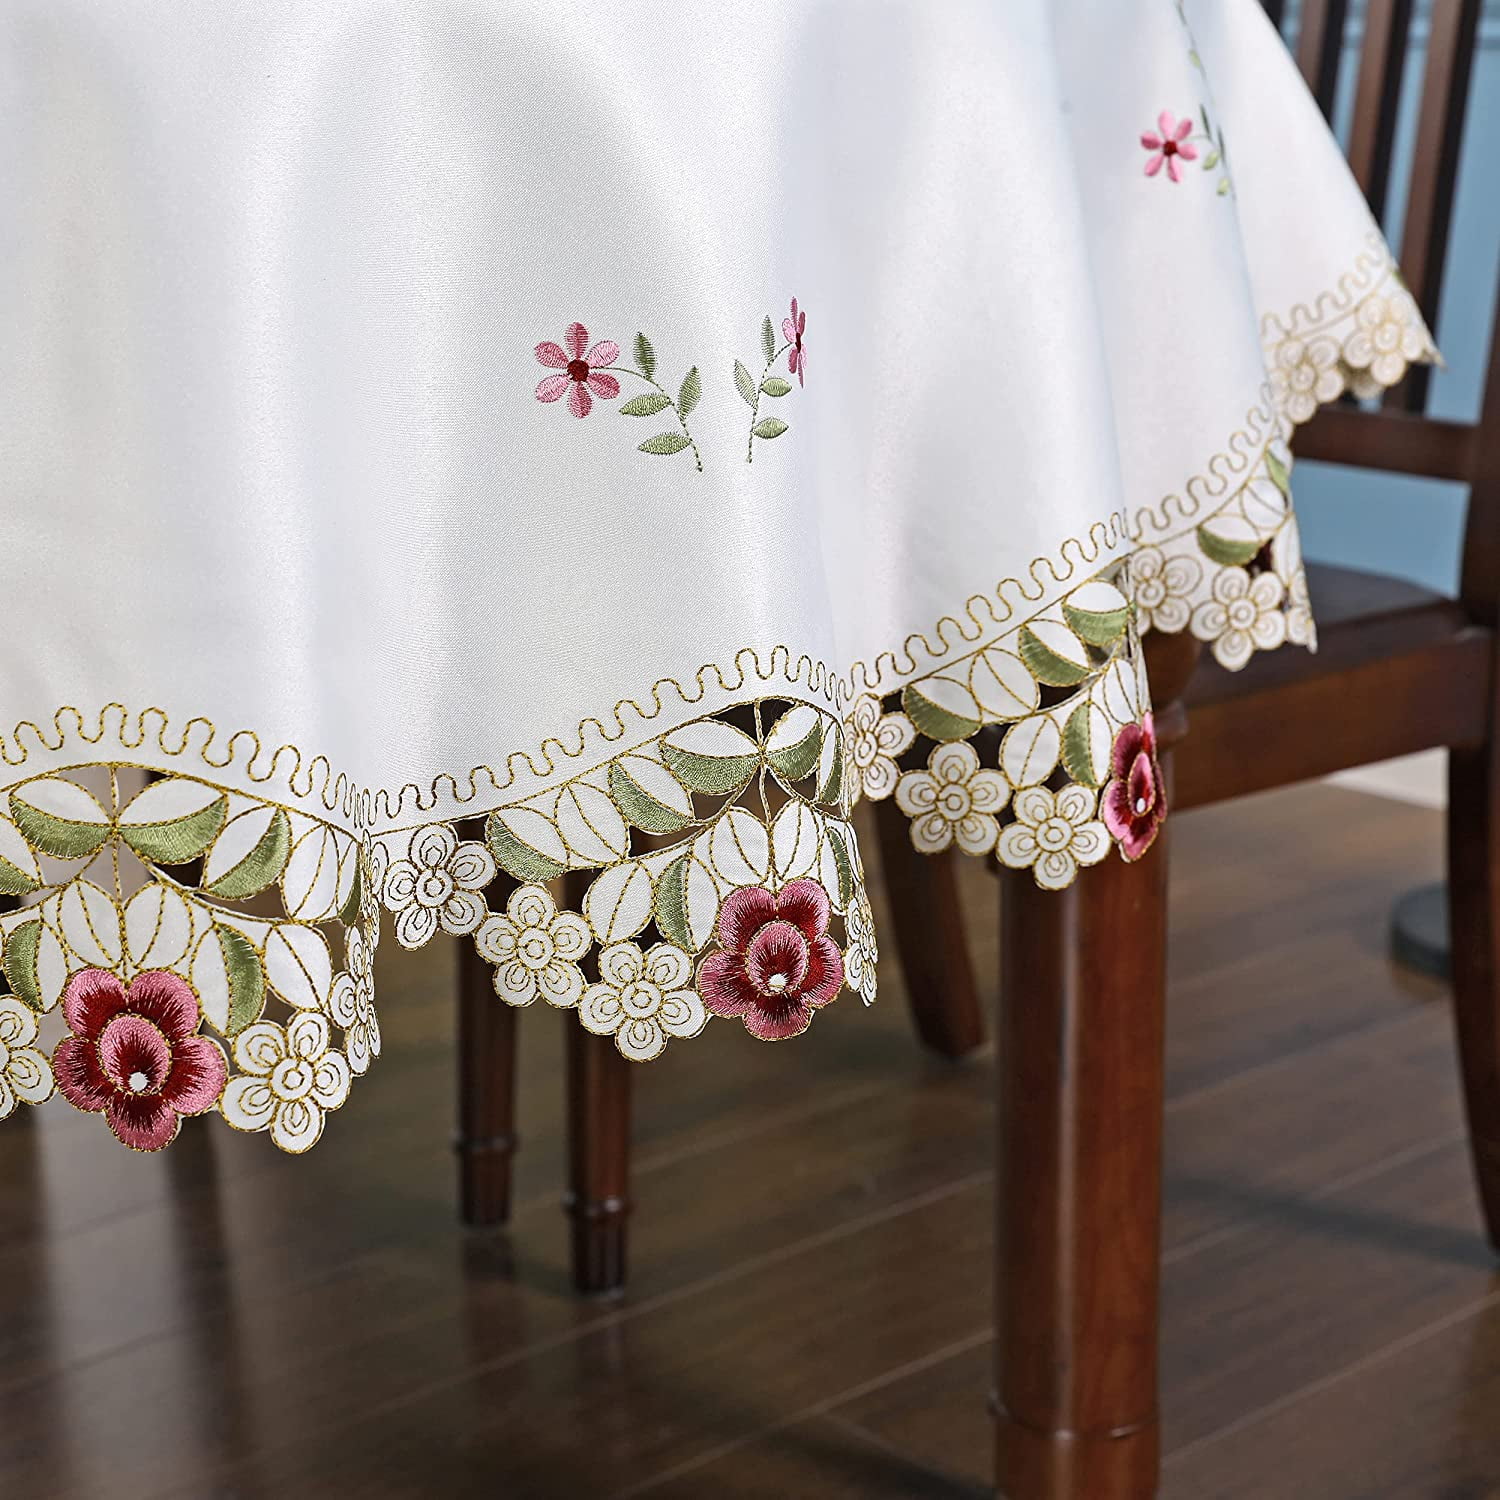 72"x126" Large Embroidered Tablecloth Camellia Floral Table Linen Home Decor, 